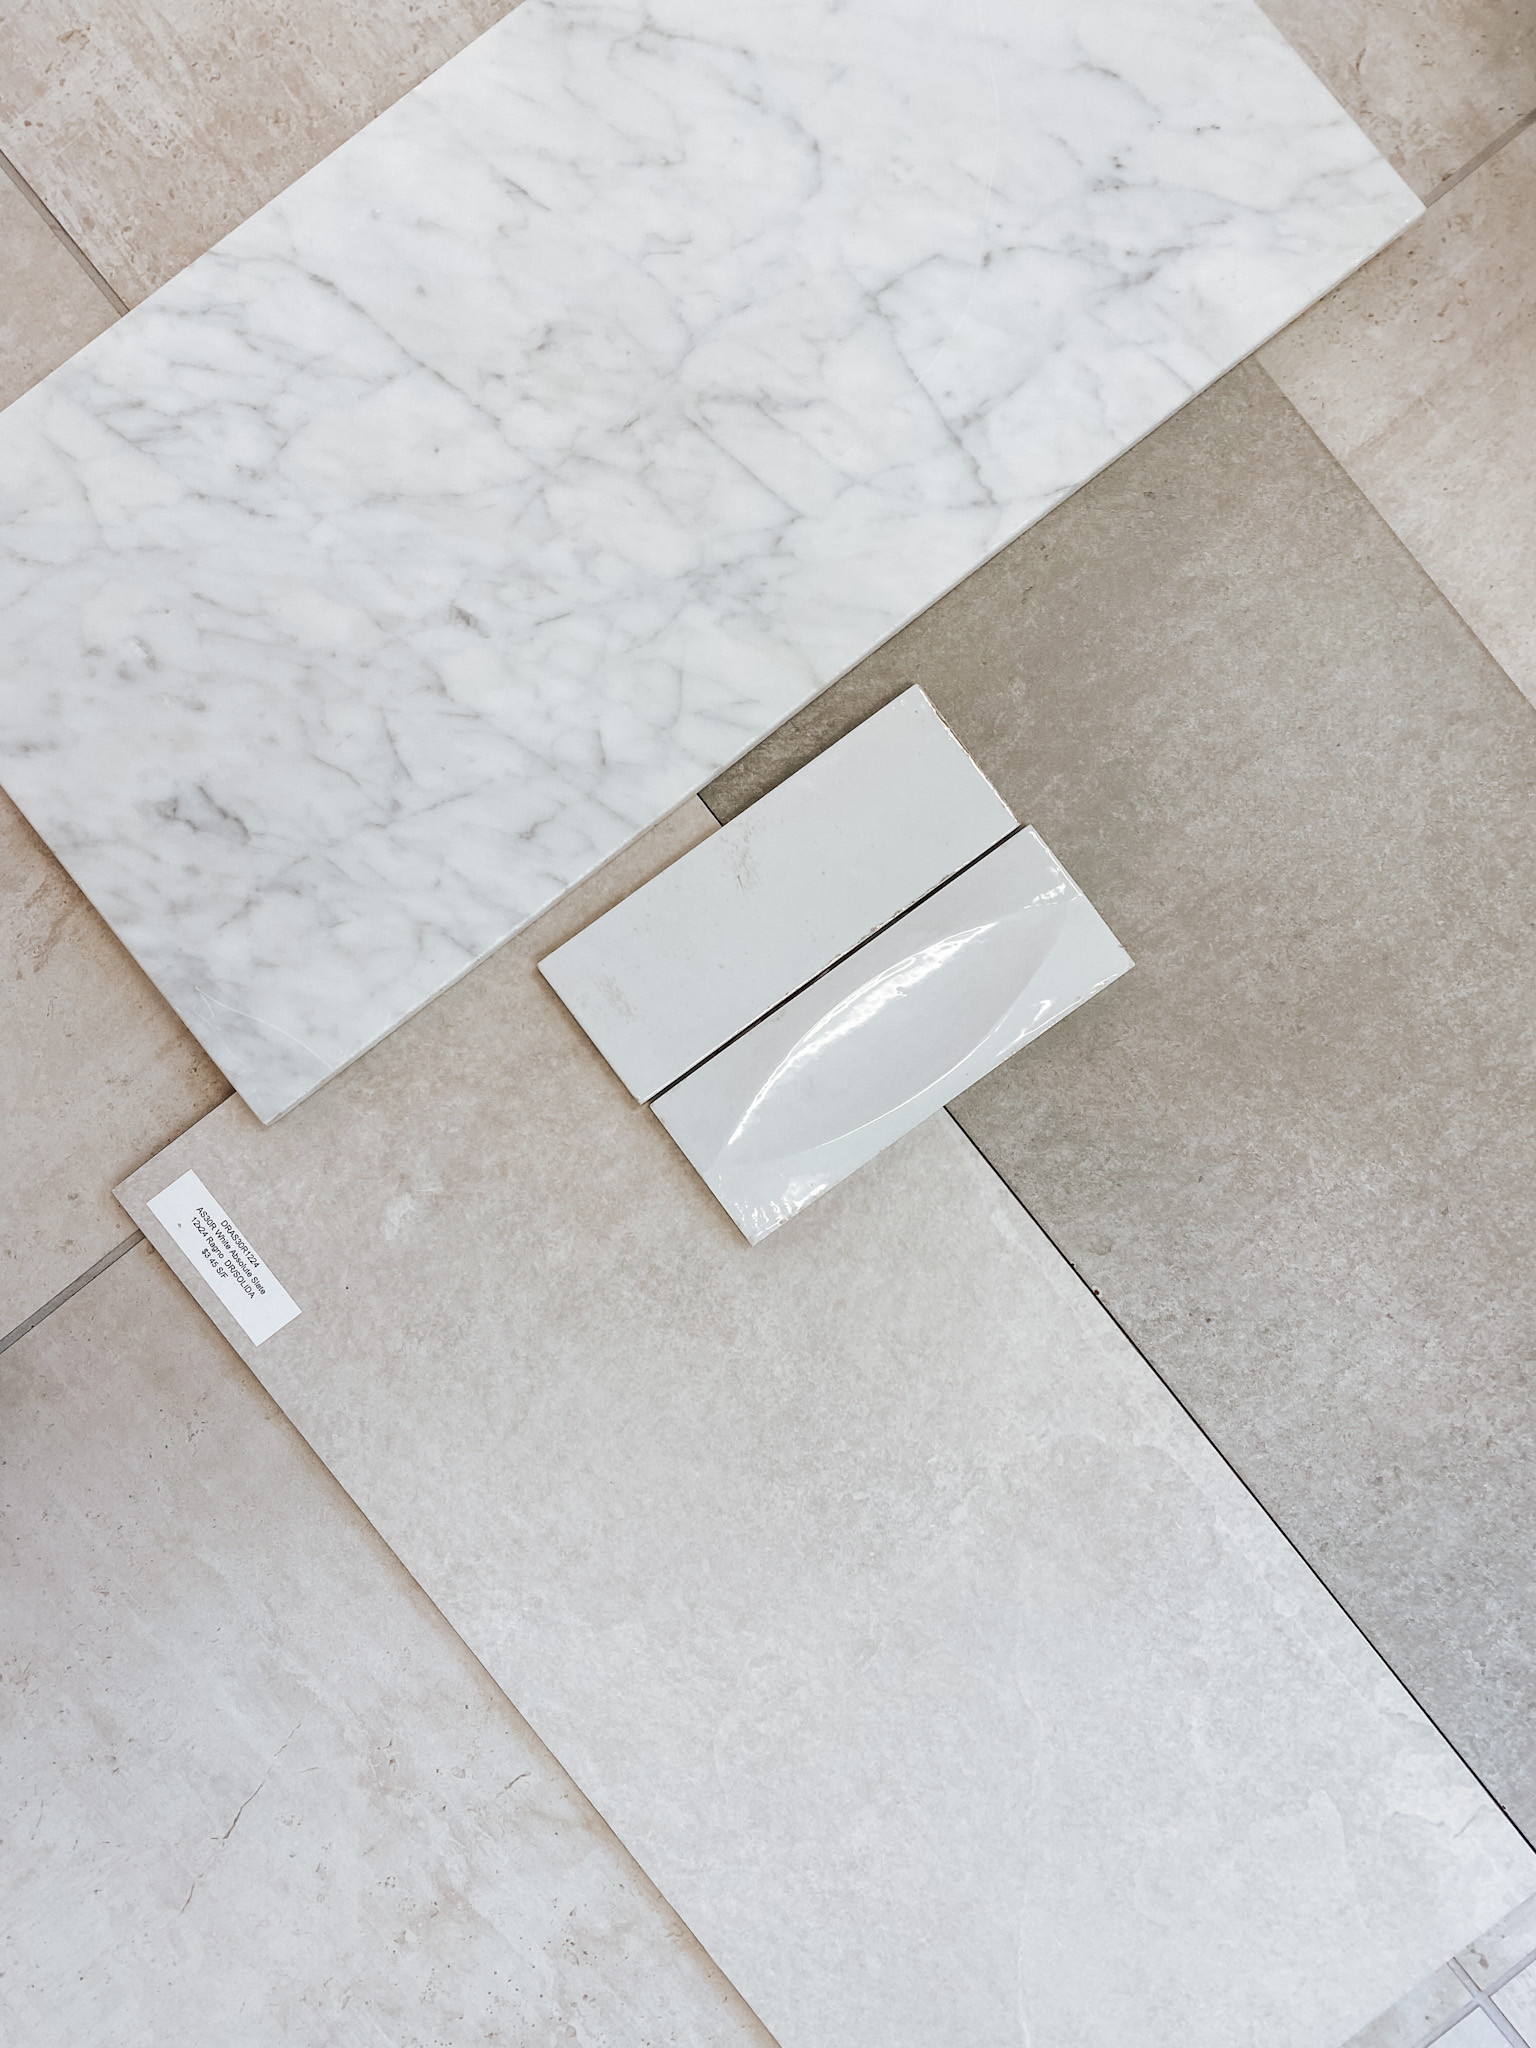 Marble and ceramic tile in neutral colors